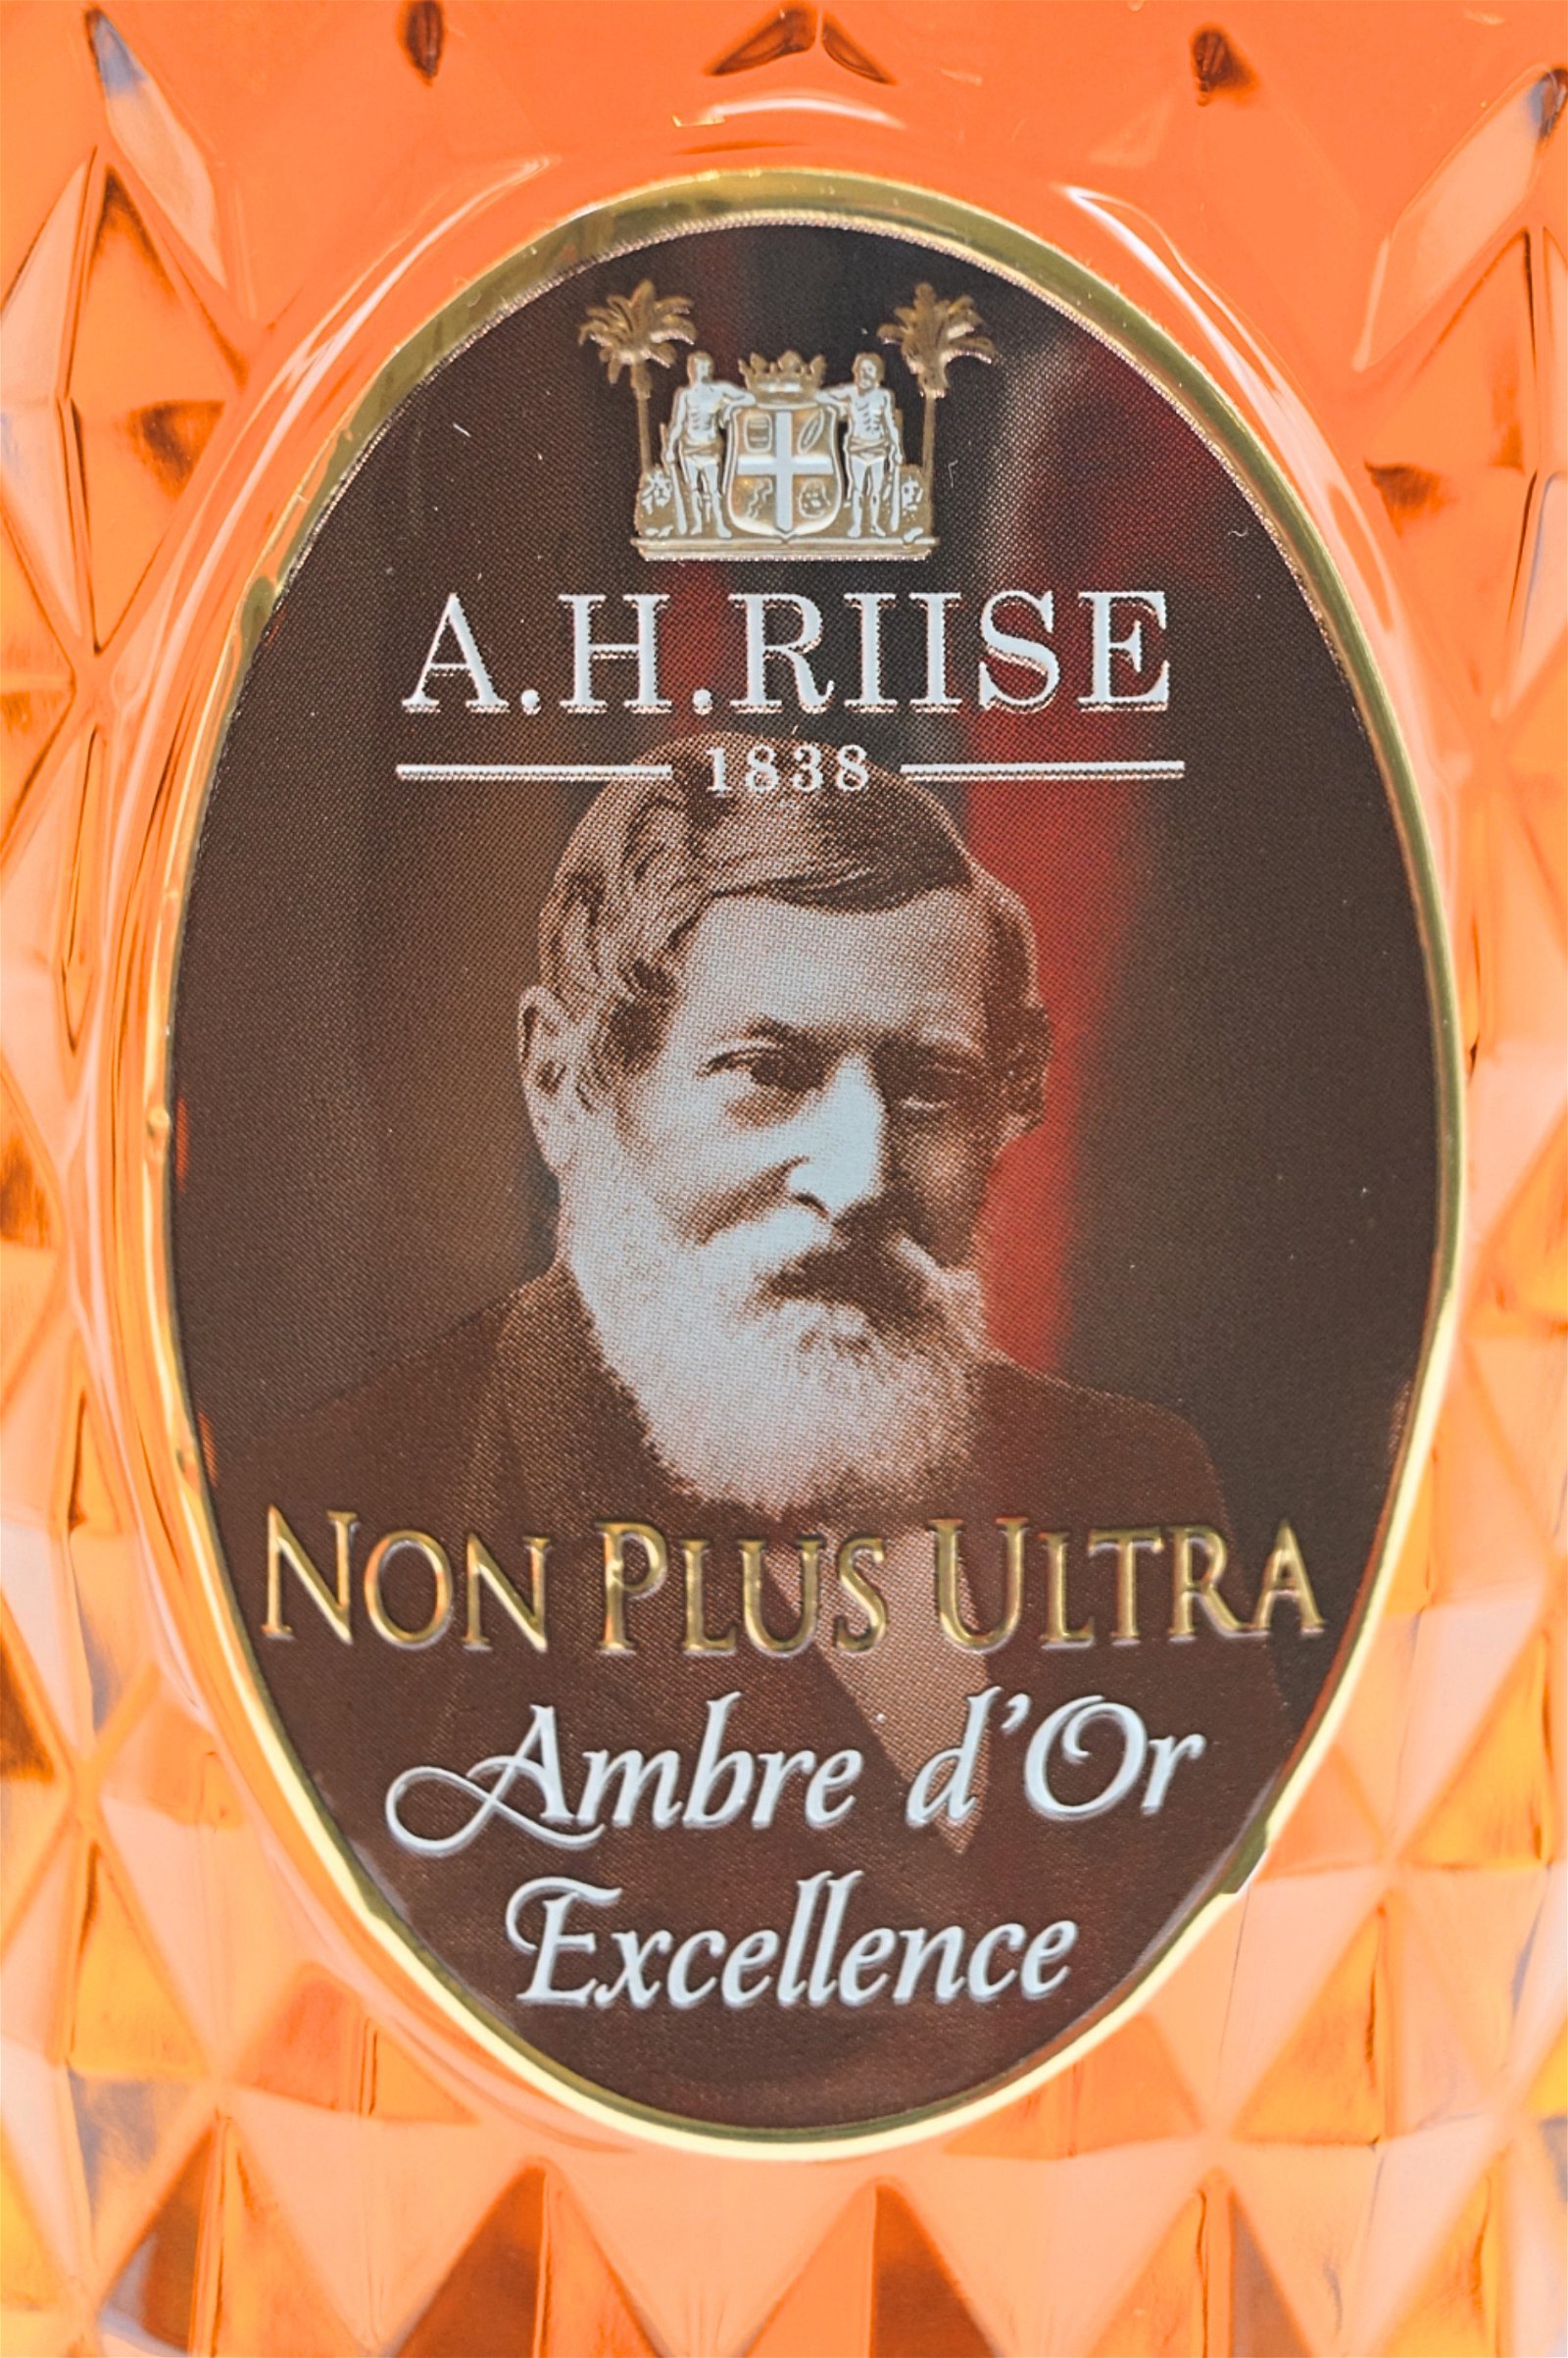 A.H.Riise Non Plus Ultra Ambre d Or Excellence Rum